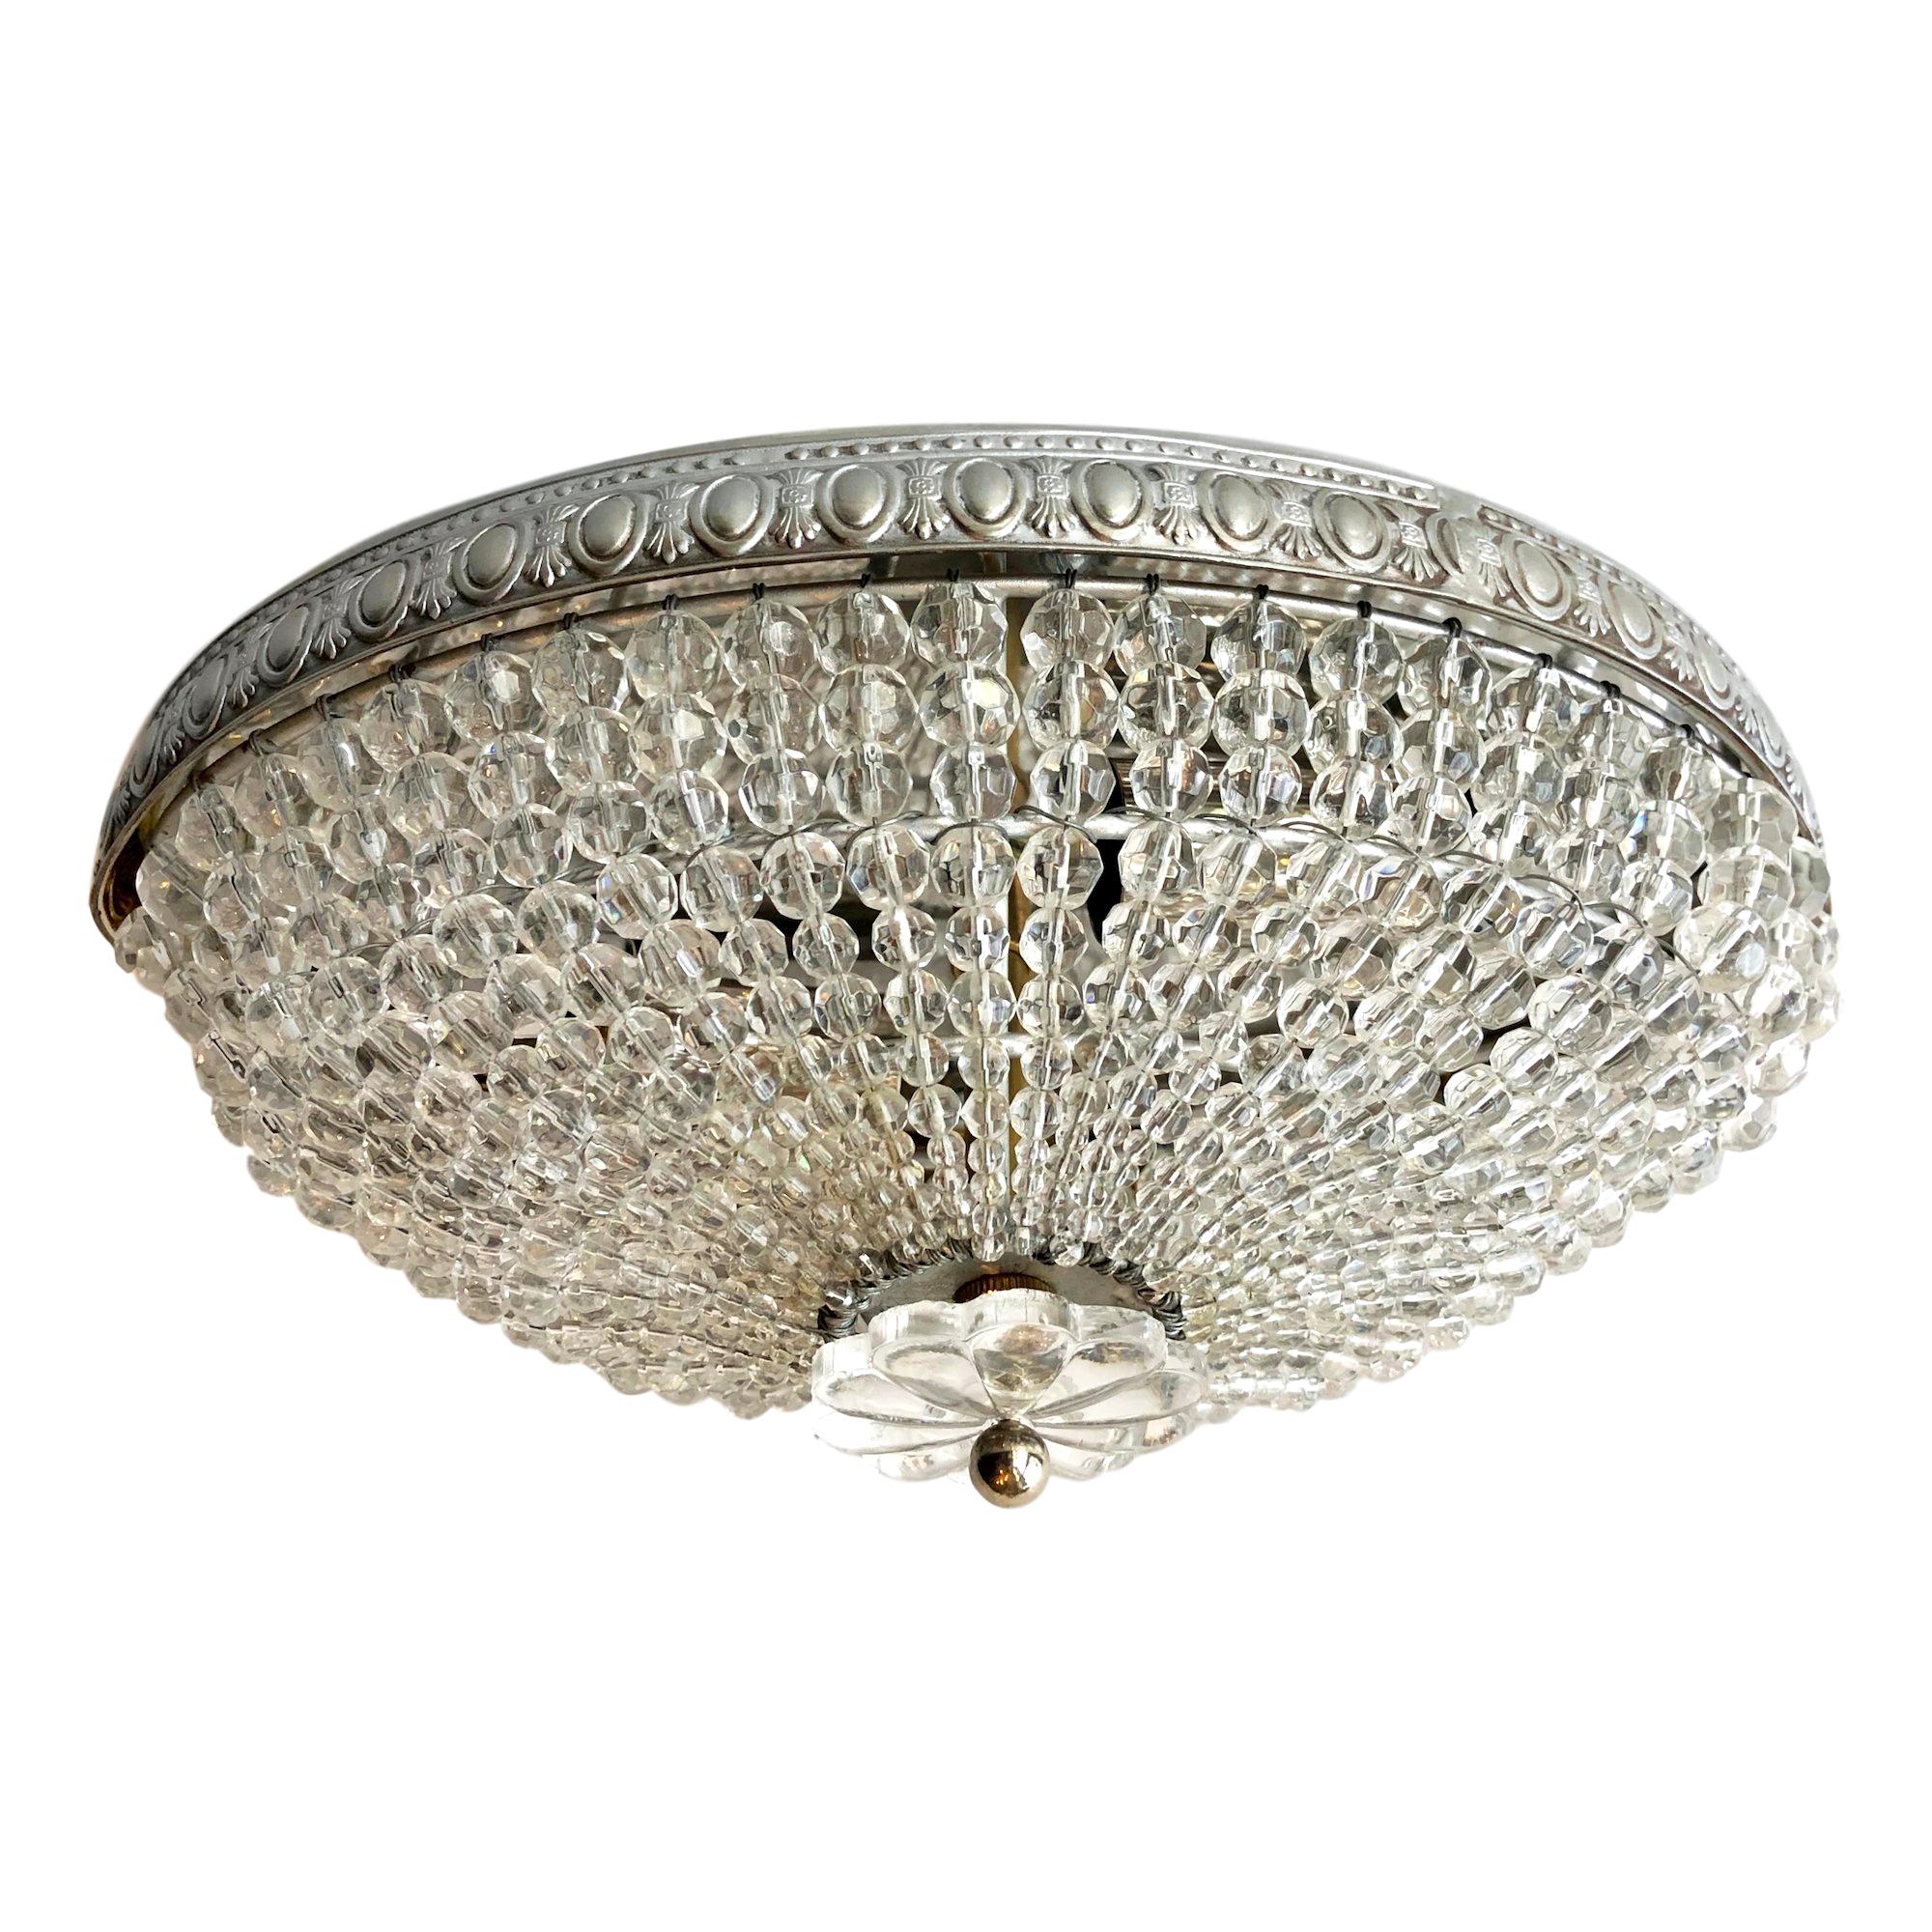 Pair of Beaded Crystal Flush Mount Fixtures, Sold Individually